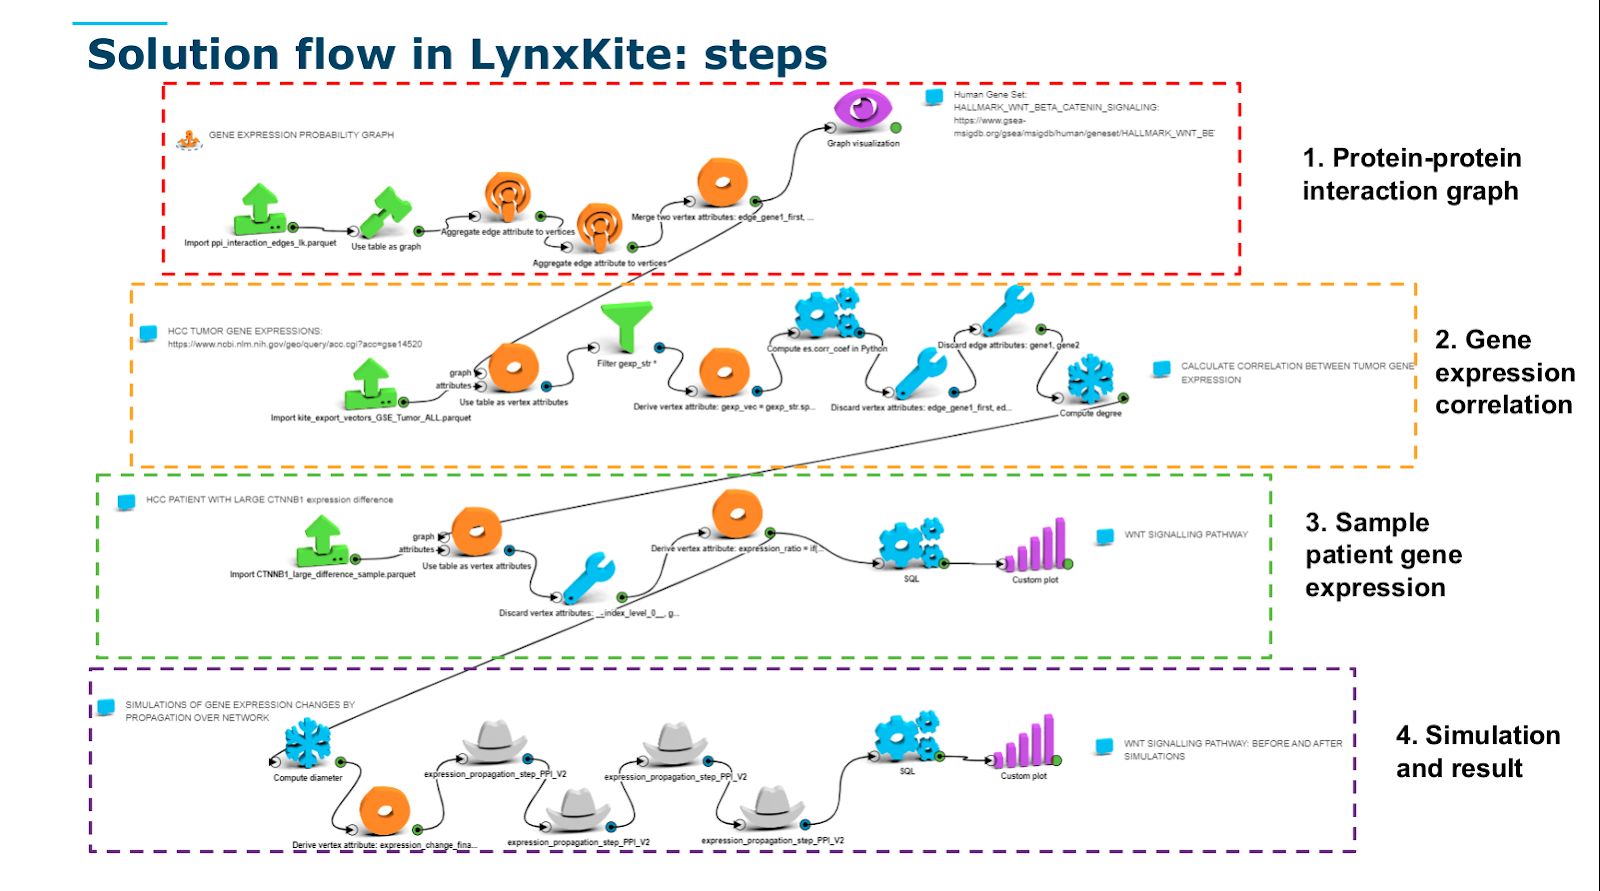 The solution flow in LynxKite